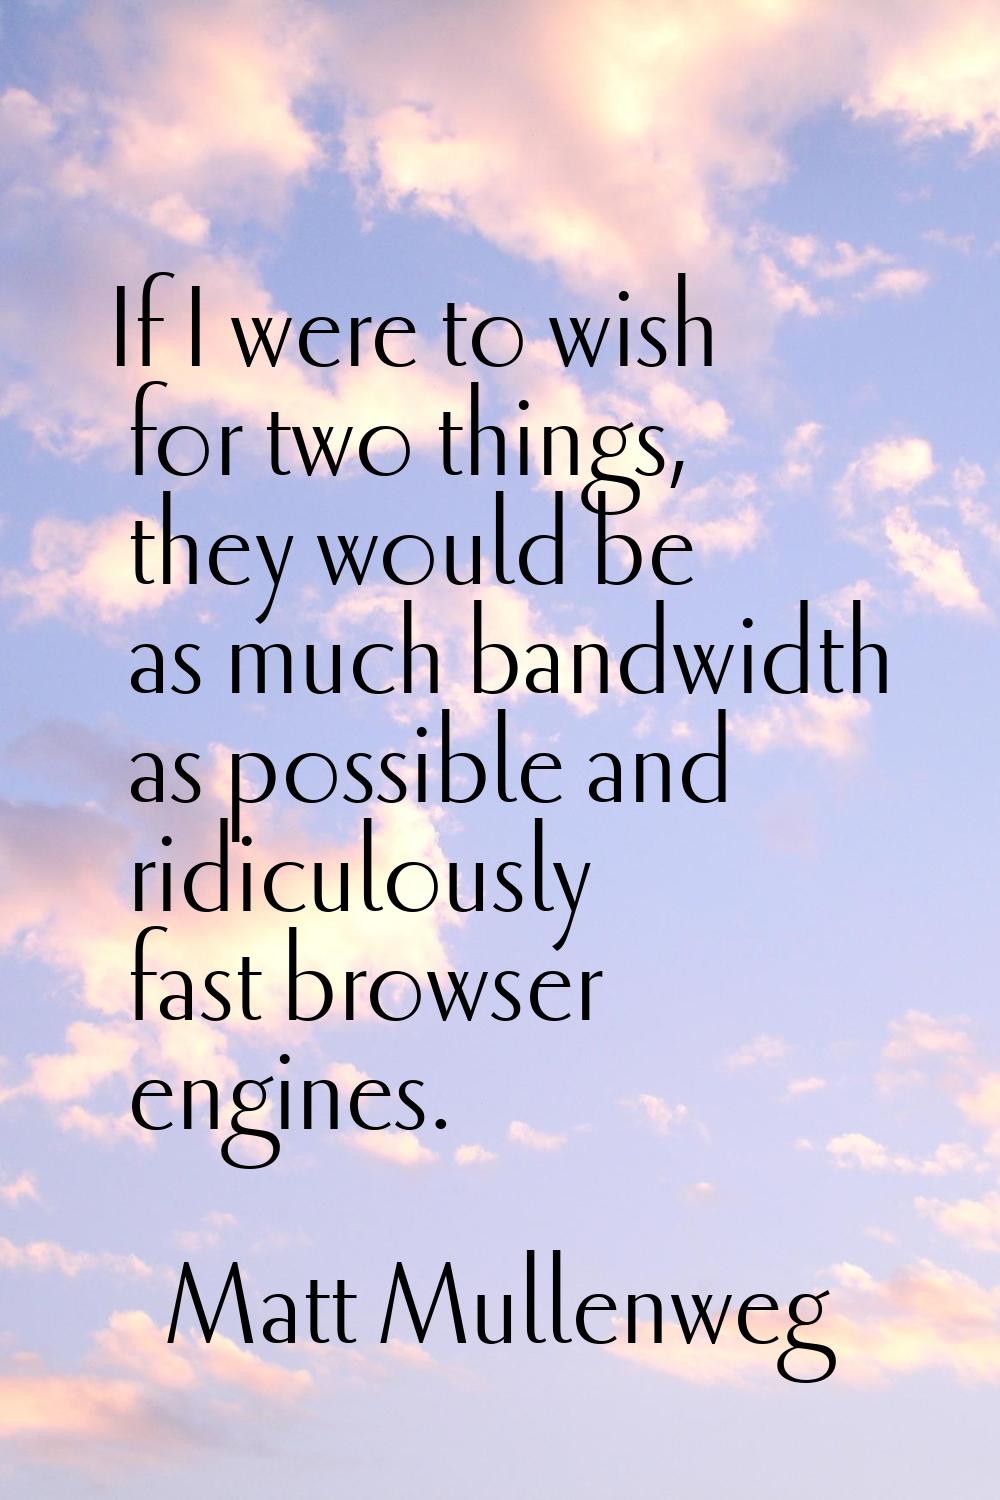 If I were to wish for two things, they would be as much bandwidth as possible and ridiculously fast